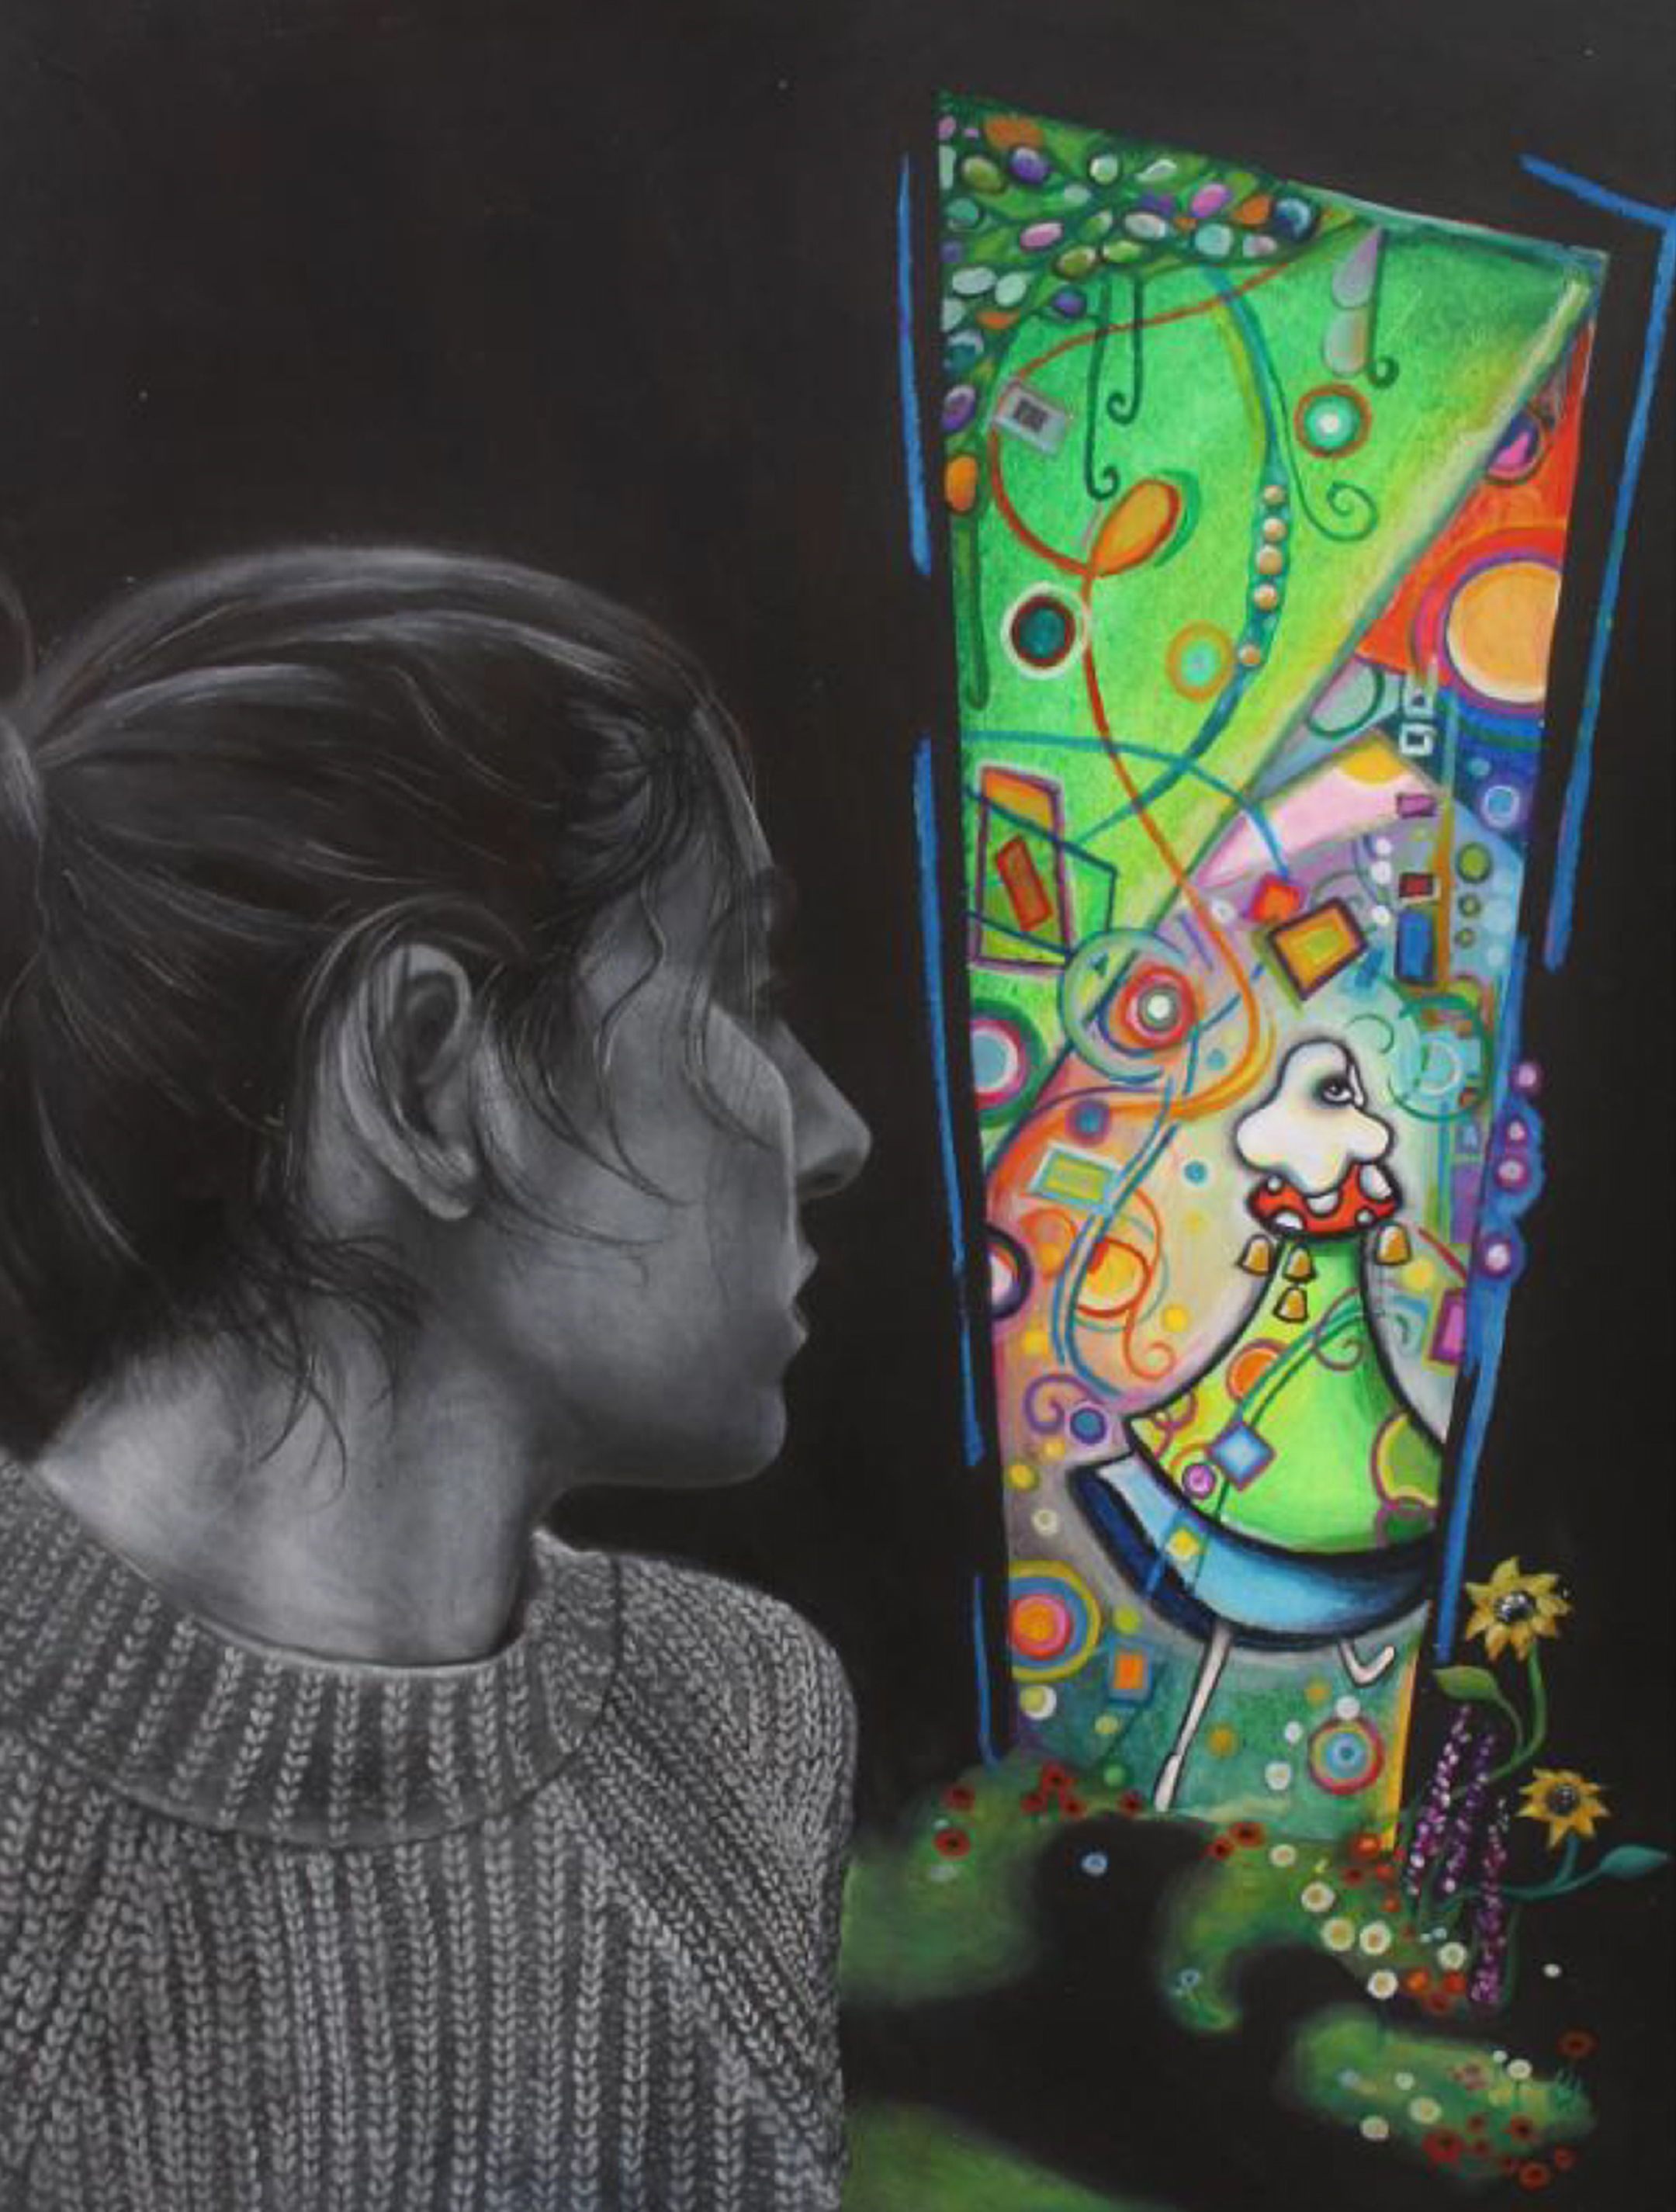 Painting of a young woman, in black and white, looking at a window of color and abstract shapes